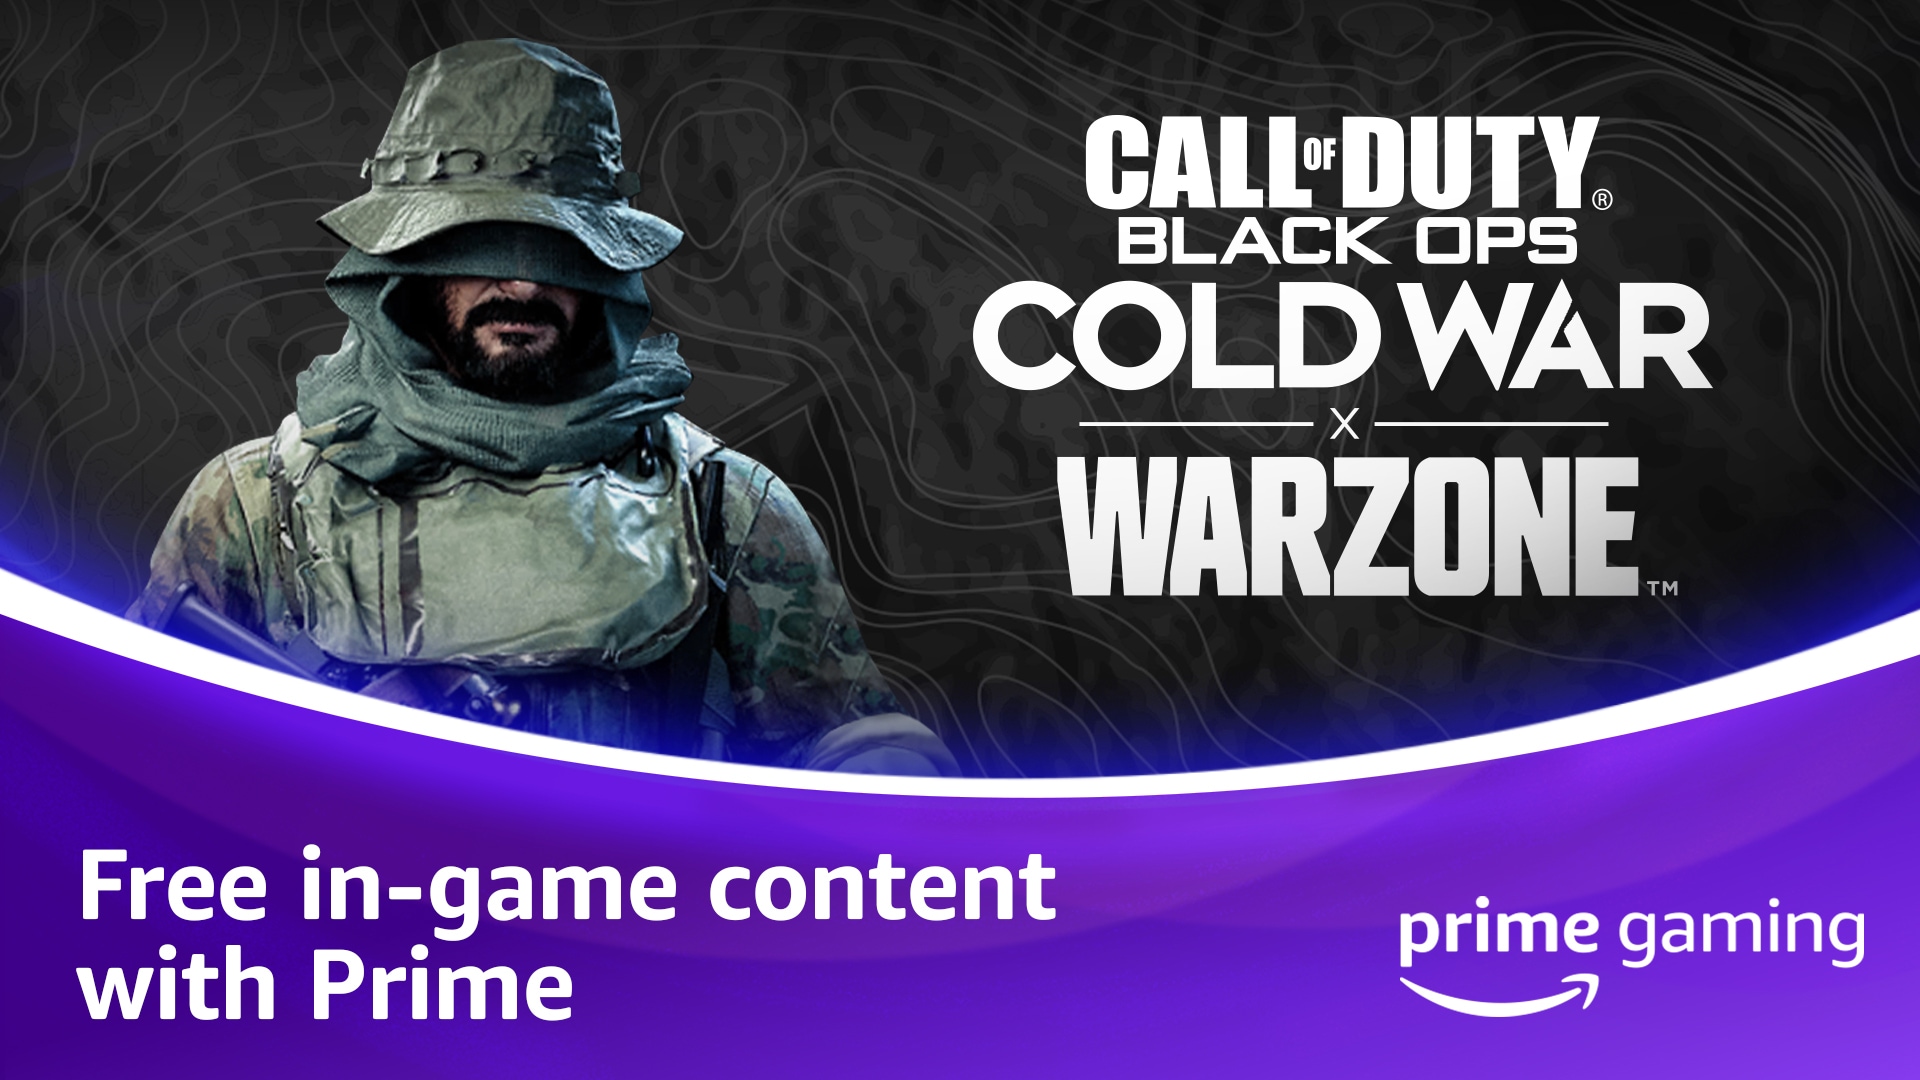 Introducing Call of Duty®: Black Ops Cold War, Warzone™, and Mobile Prime  Gaming rewards for Prime members — news.community.zeus — Blizzard News